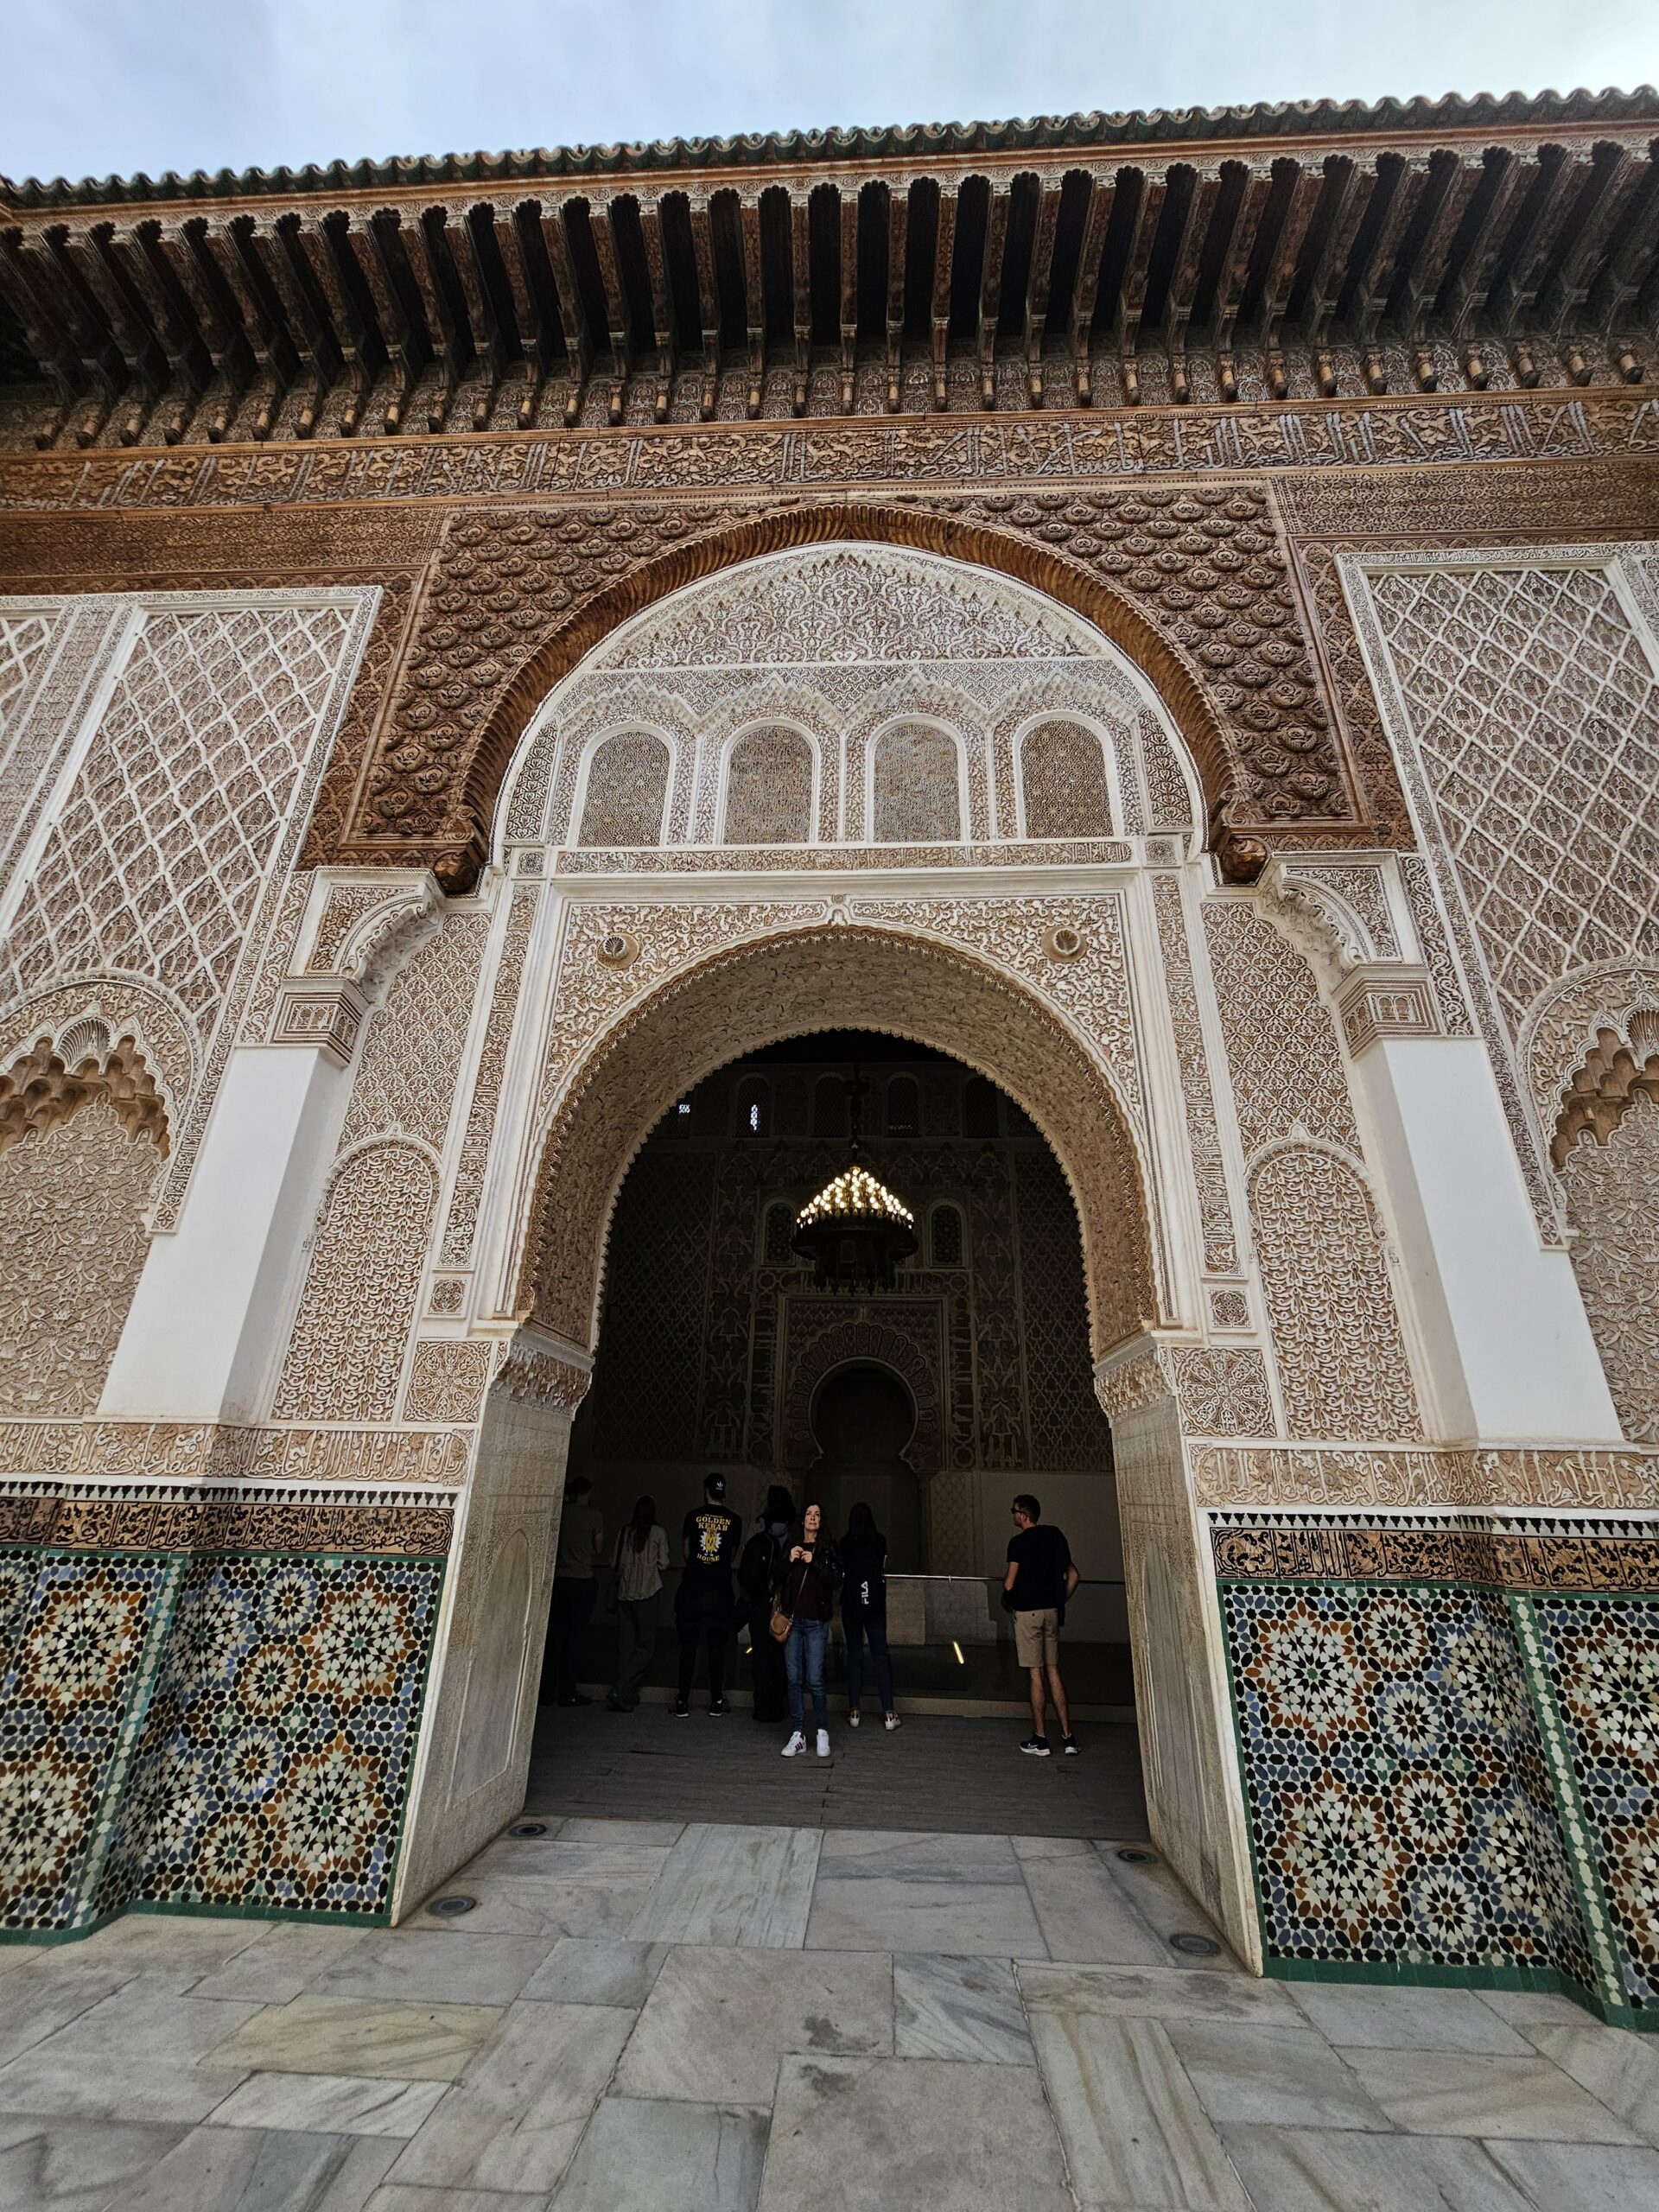 An ornate wooden door with beautifully carved surrounding walls which have colourful Islamic tiles at the lower half at Ben Youssef Madrasa, Marrakesh. Image by 360onhistory.com